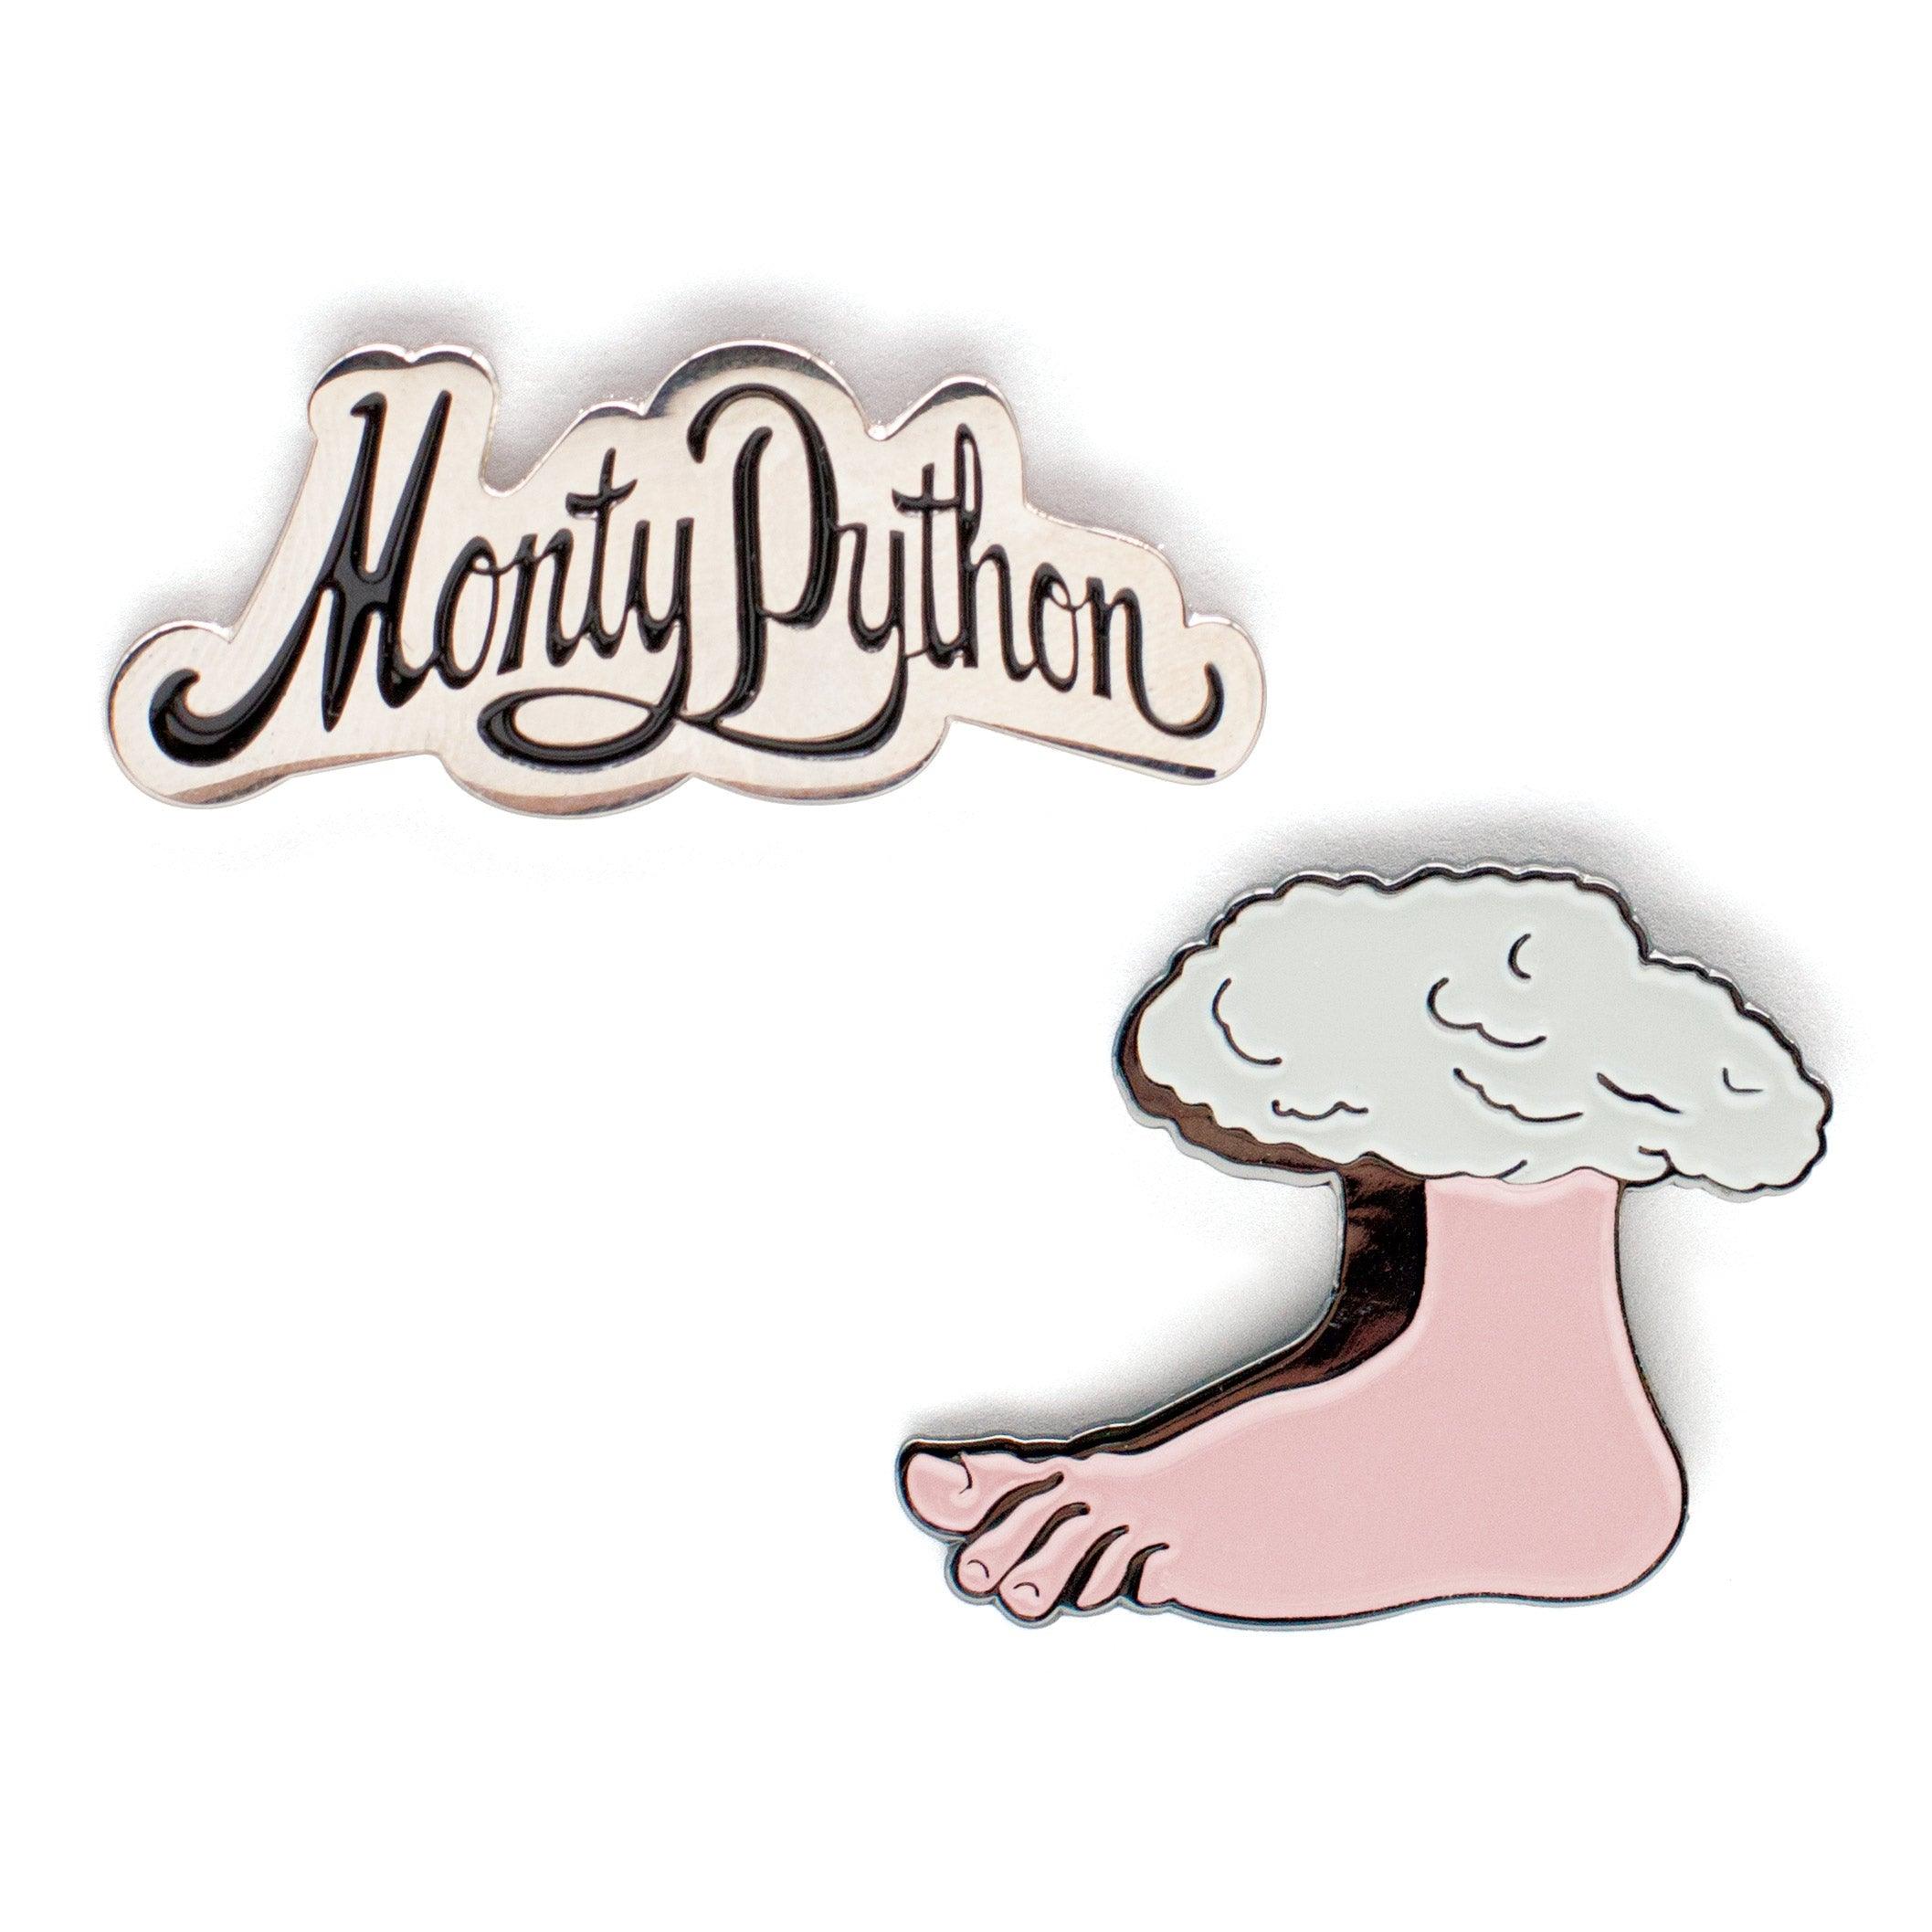 Product photo of Monty Python Logo Enamel Pin Set, a novelty gift manufactured by The Unemployed Philosophers Guild.